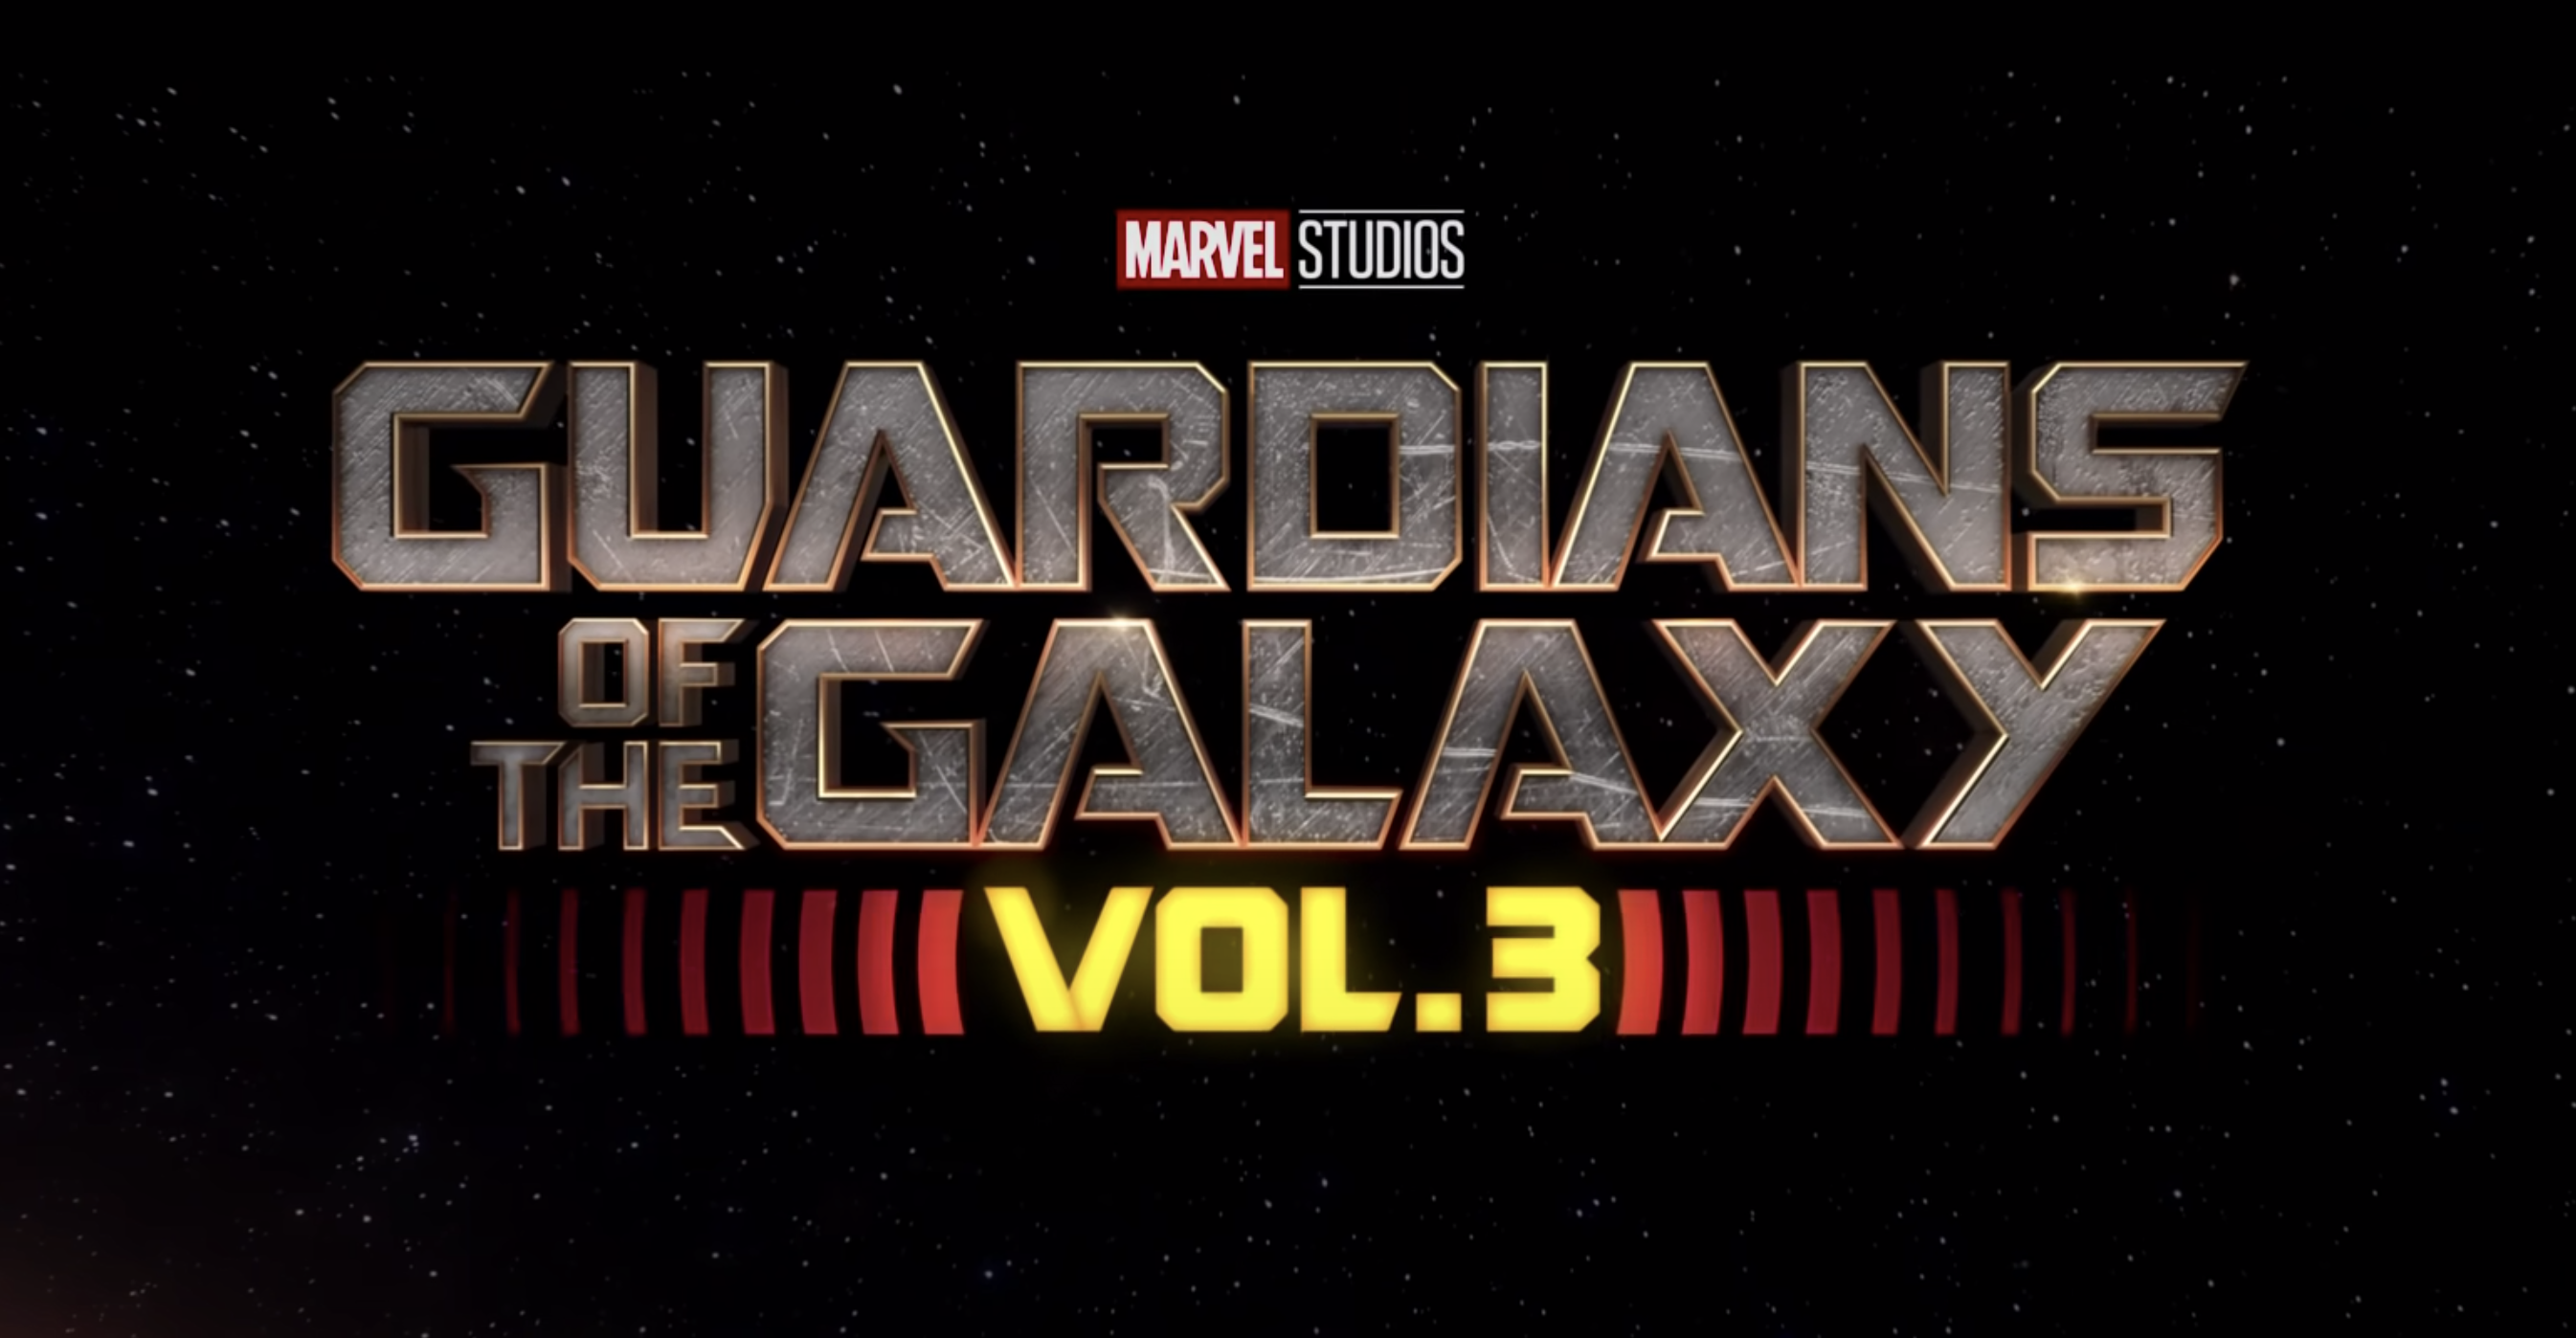 The logo for Guardians Of The Galaxy Vol. 3, one of the upcoming marvel movies